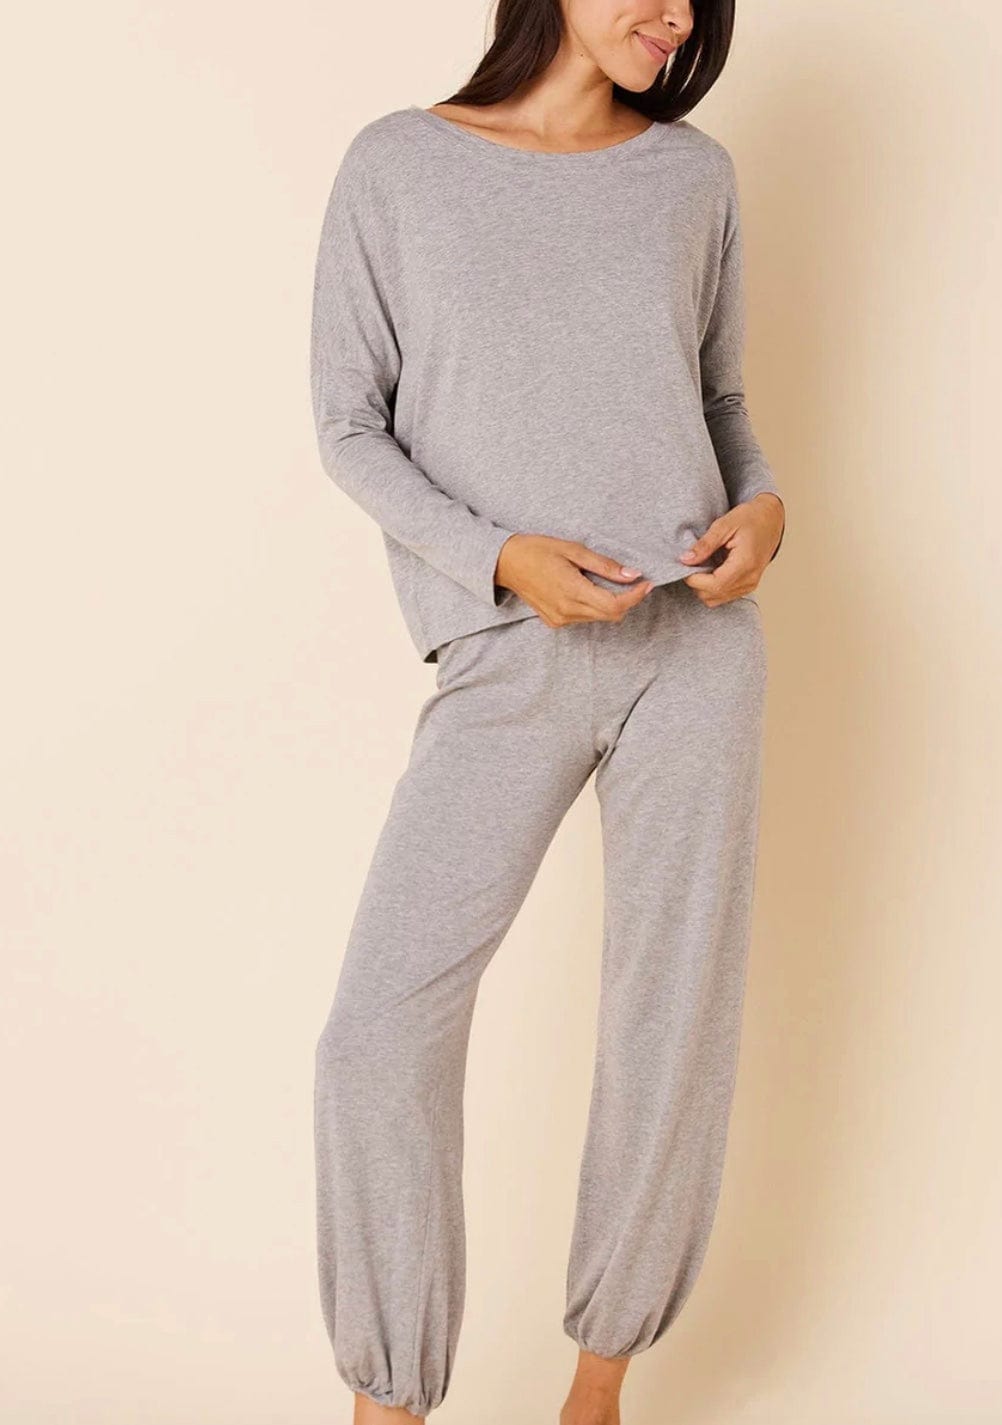 Women S Pants Autumn And Winter Funny Cute Couple Pajama With A Ringing Elephant  Trunk 231201 From Chao04, $14.04